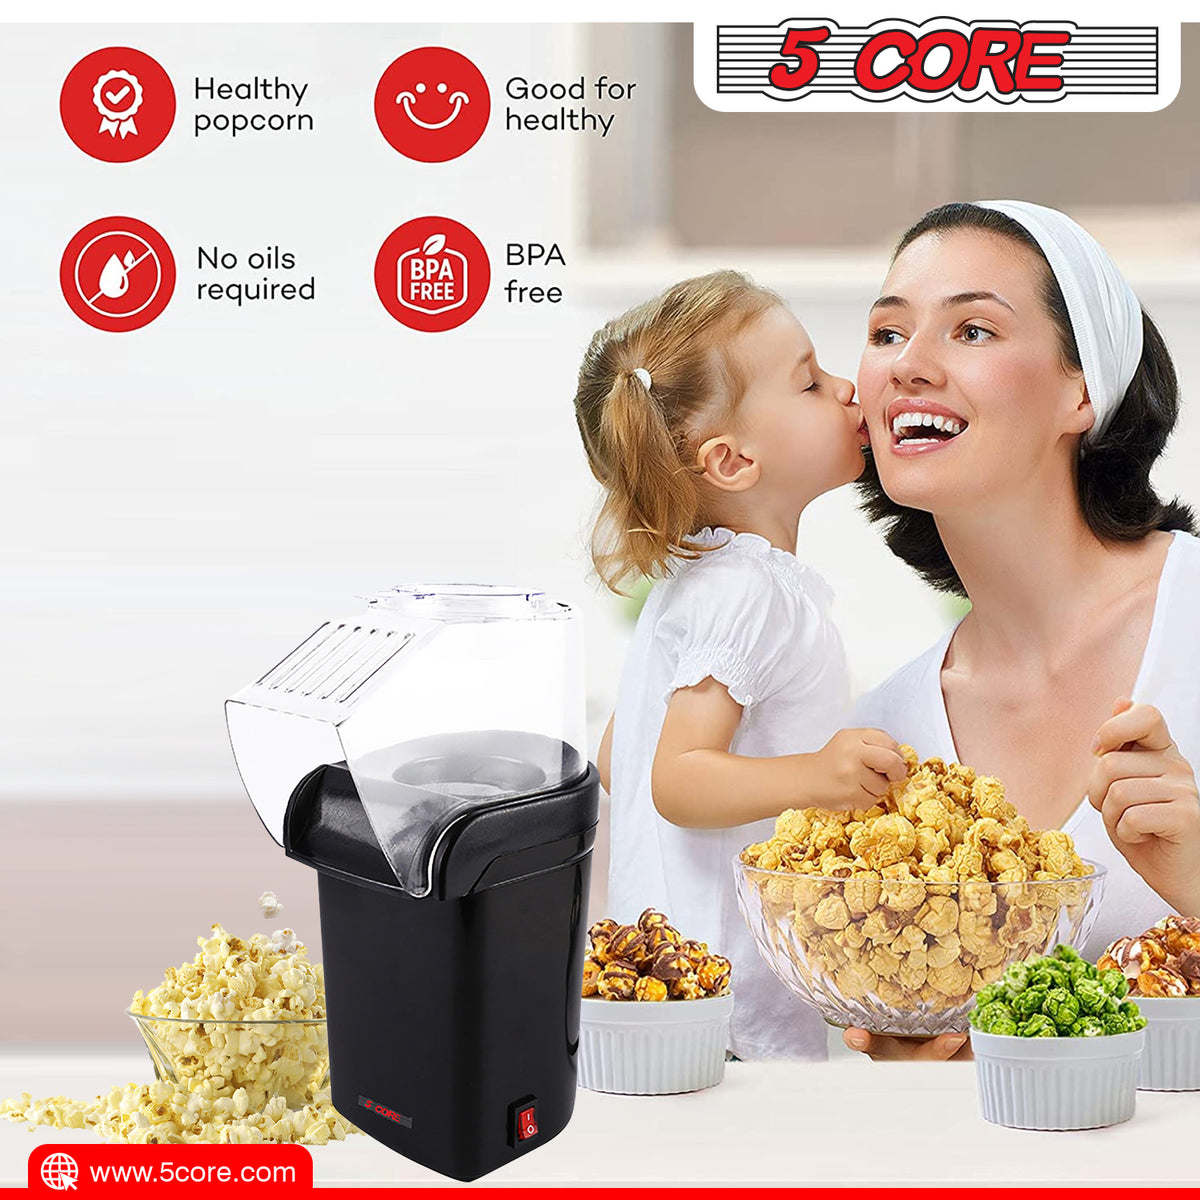 5 Core Hot Air Popcorn Popper Machine 1200W Electric Popcorn Kernel Corn Maker Bpa Free, 95% Popping Rate, 2 Minutes Fast, No Oil-Healthy Snack for Kids Adults, Home, Party, Gift POP